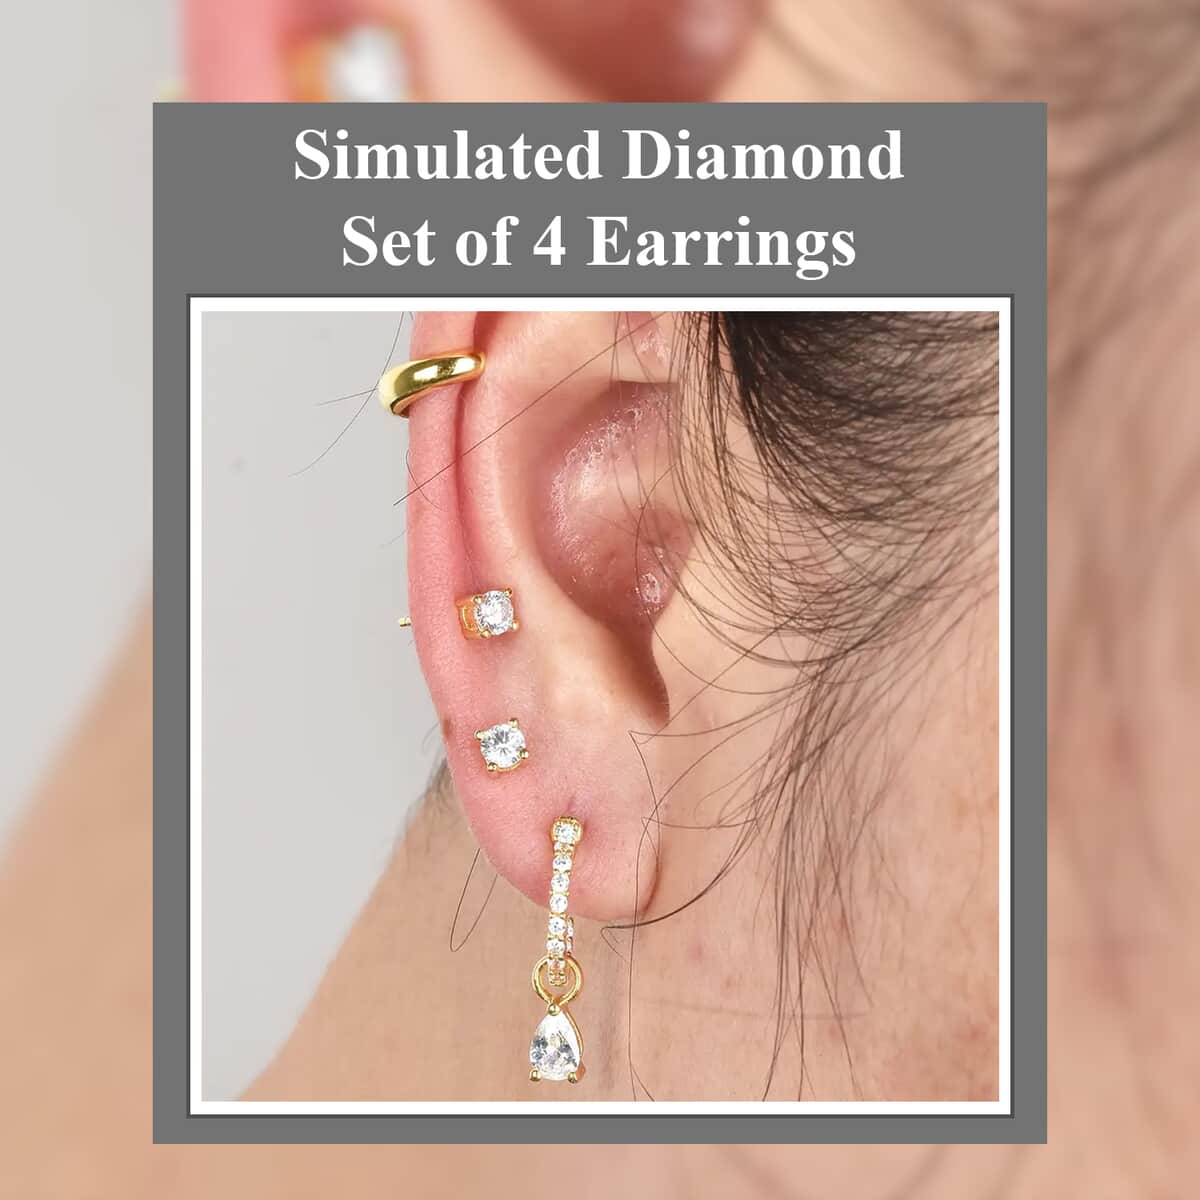 Ear Party, Set of 4 Simulated Diamond Earring Pairs, 1 Huggie Hoop Earrings with Tear Drop Interchangeable Charms, 1 Plain Ear Cuffs, and 2 Stud Earrings in 14K RG Over Sterling Silver 2.85 image number 2